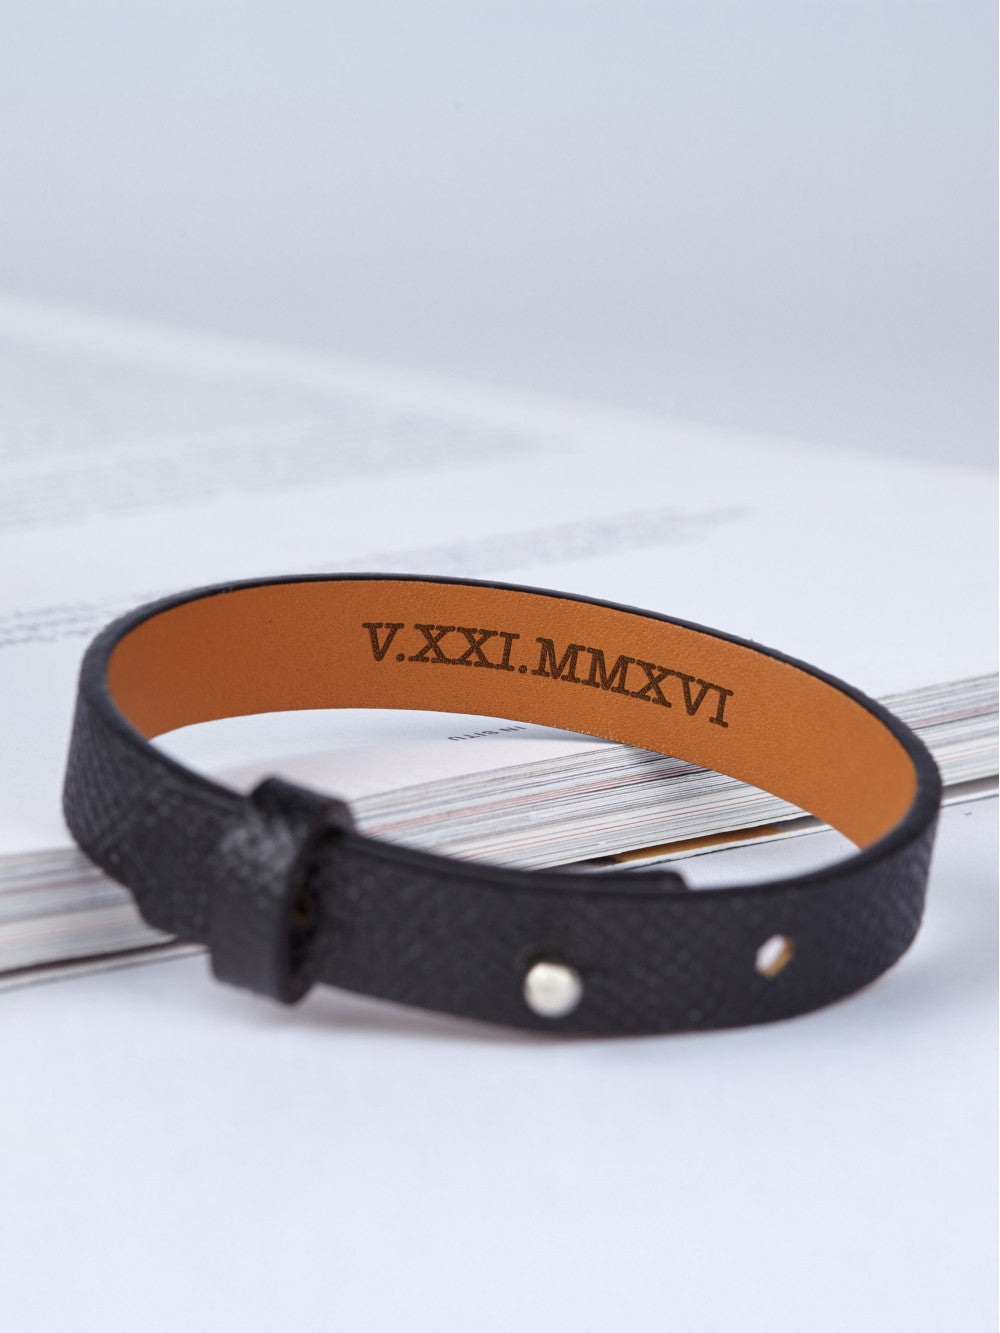 Personalized Roman Numeral Leather Bracelet for Him - Anniversary Gift - Bracelets - Bijou Her -  -  - 